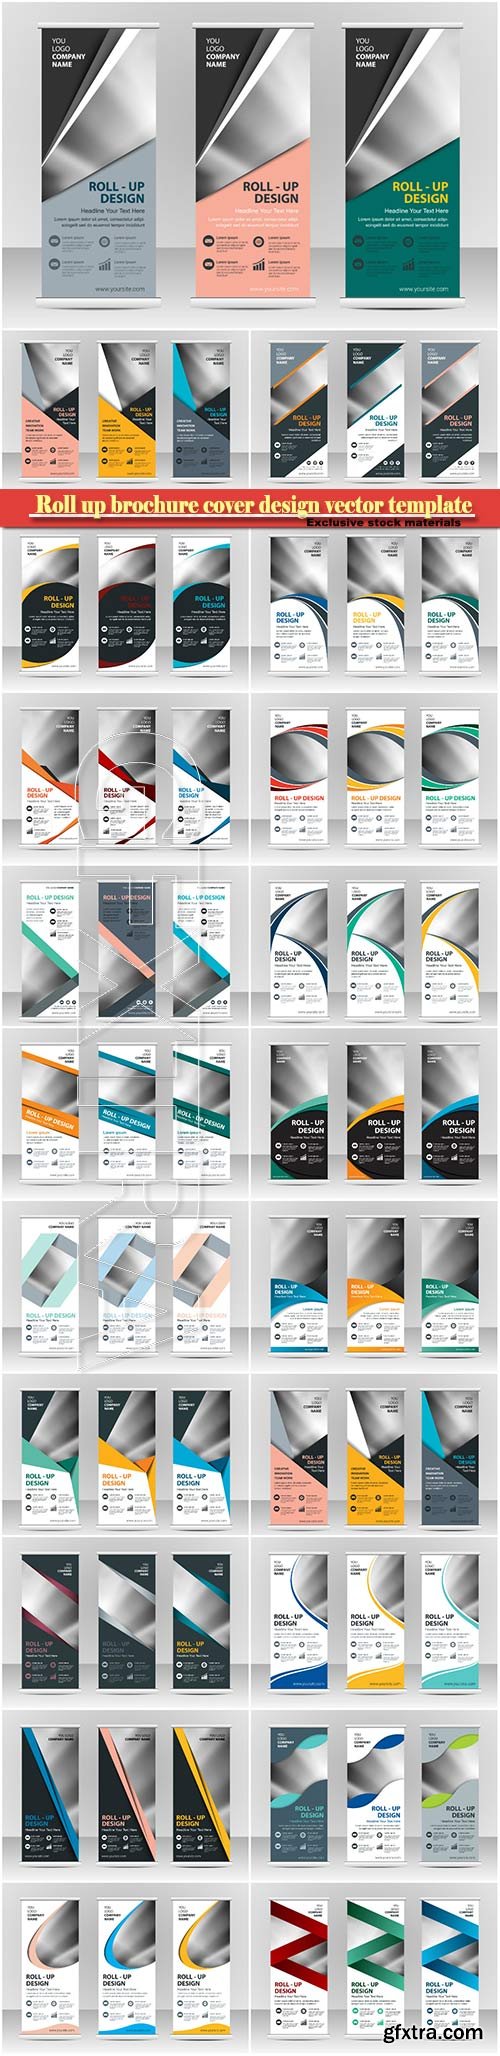 Roll up brochure cover design vector template